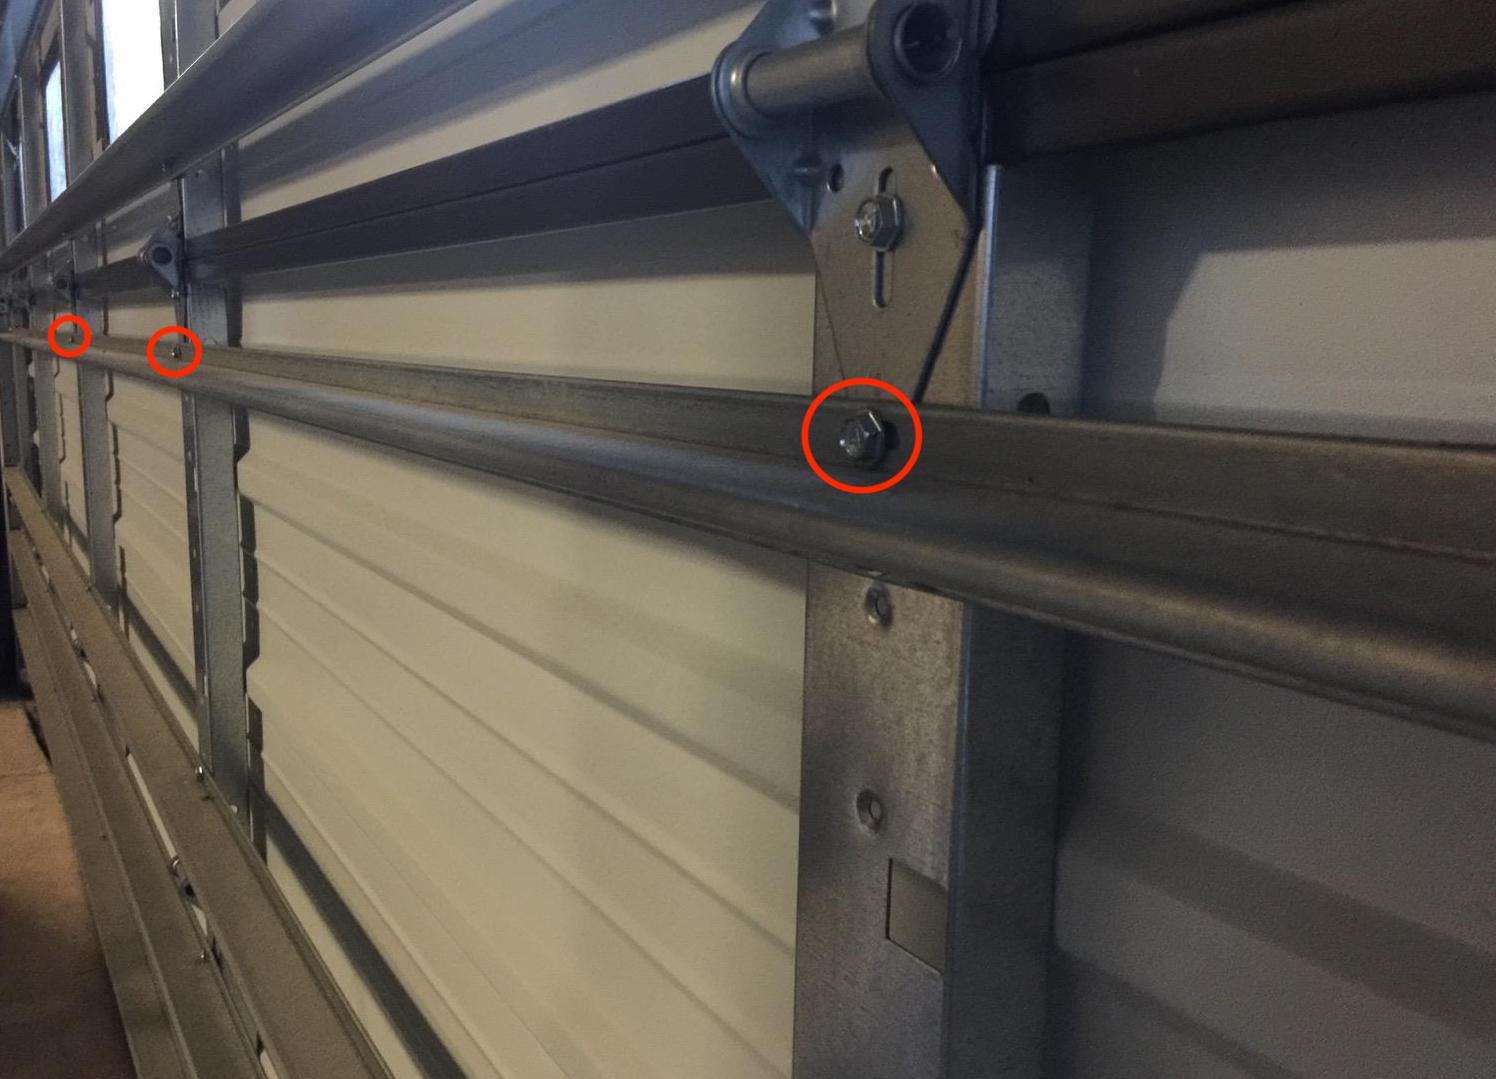 Remove the bottom screw on the garage door hinge and use it to attach the strut to the section. A second self tapping screw will need to be installed below it on the bottom of the strut.